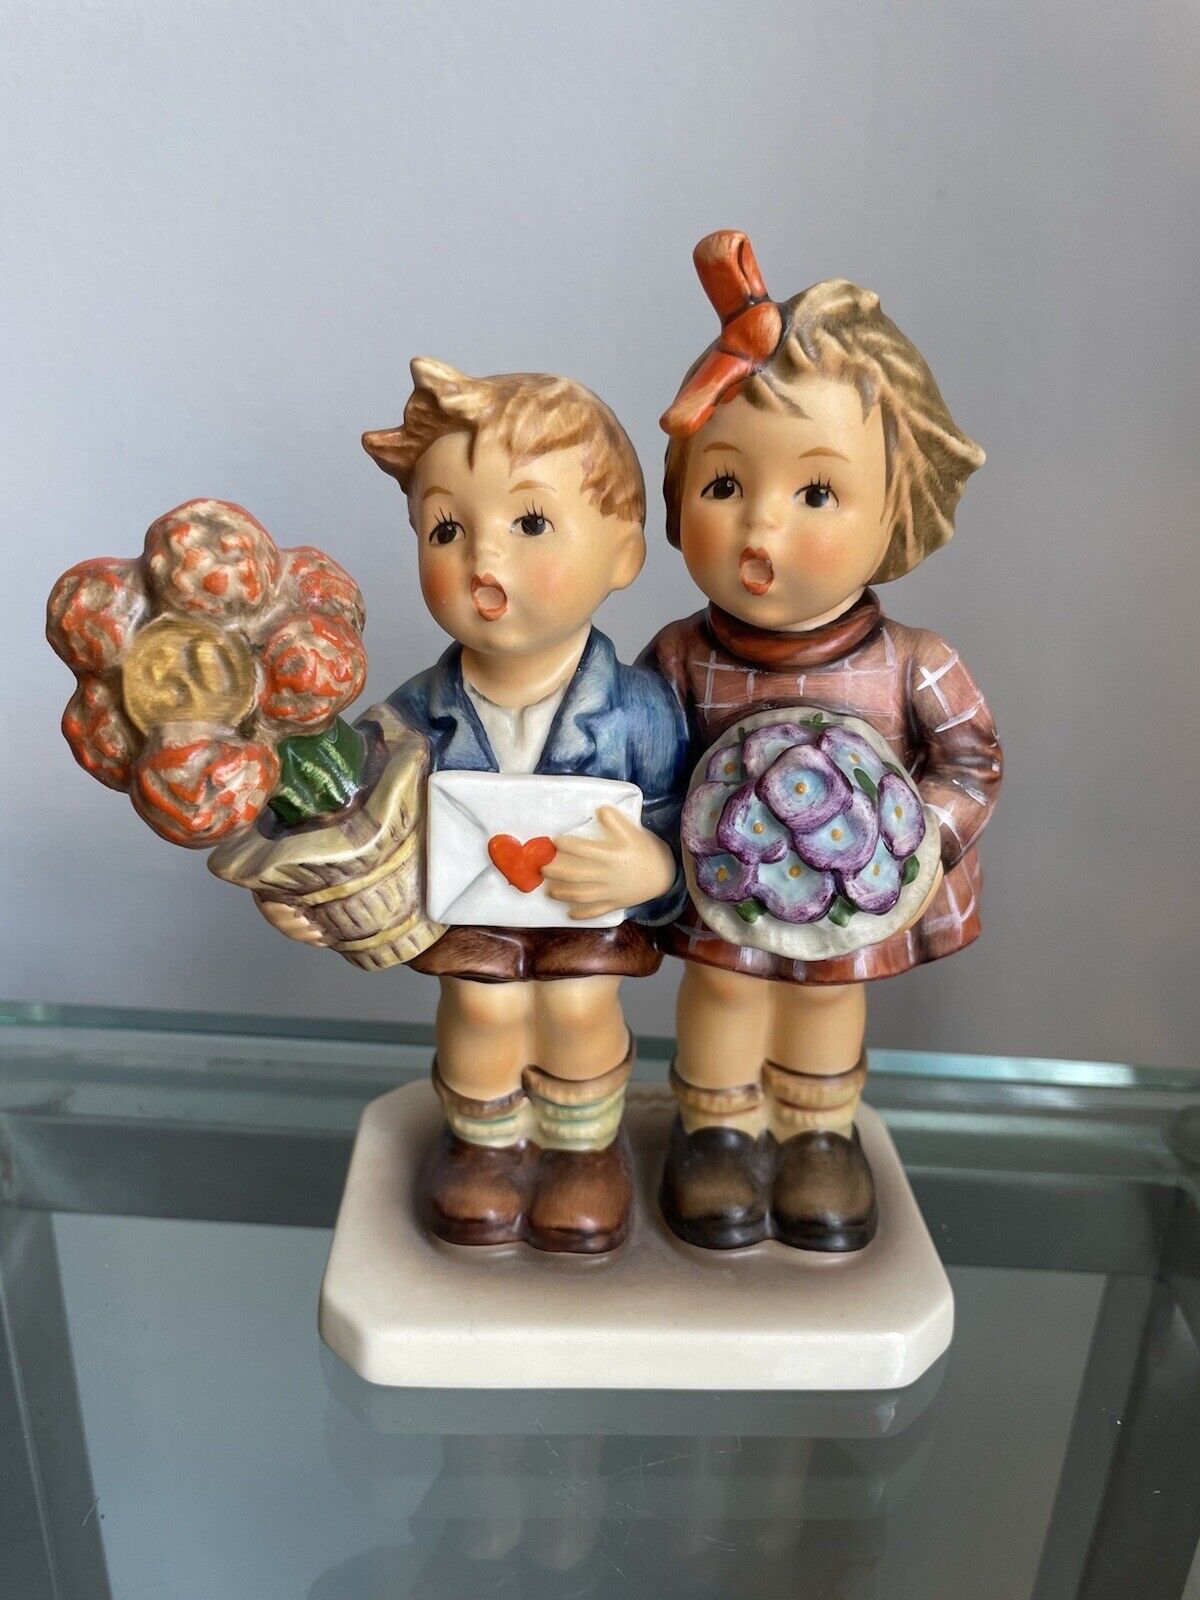 Hummel/Goebel Collectible Figurine “The Love Lives On”